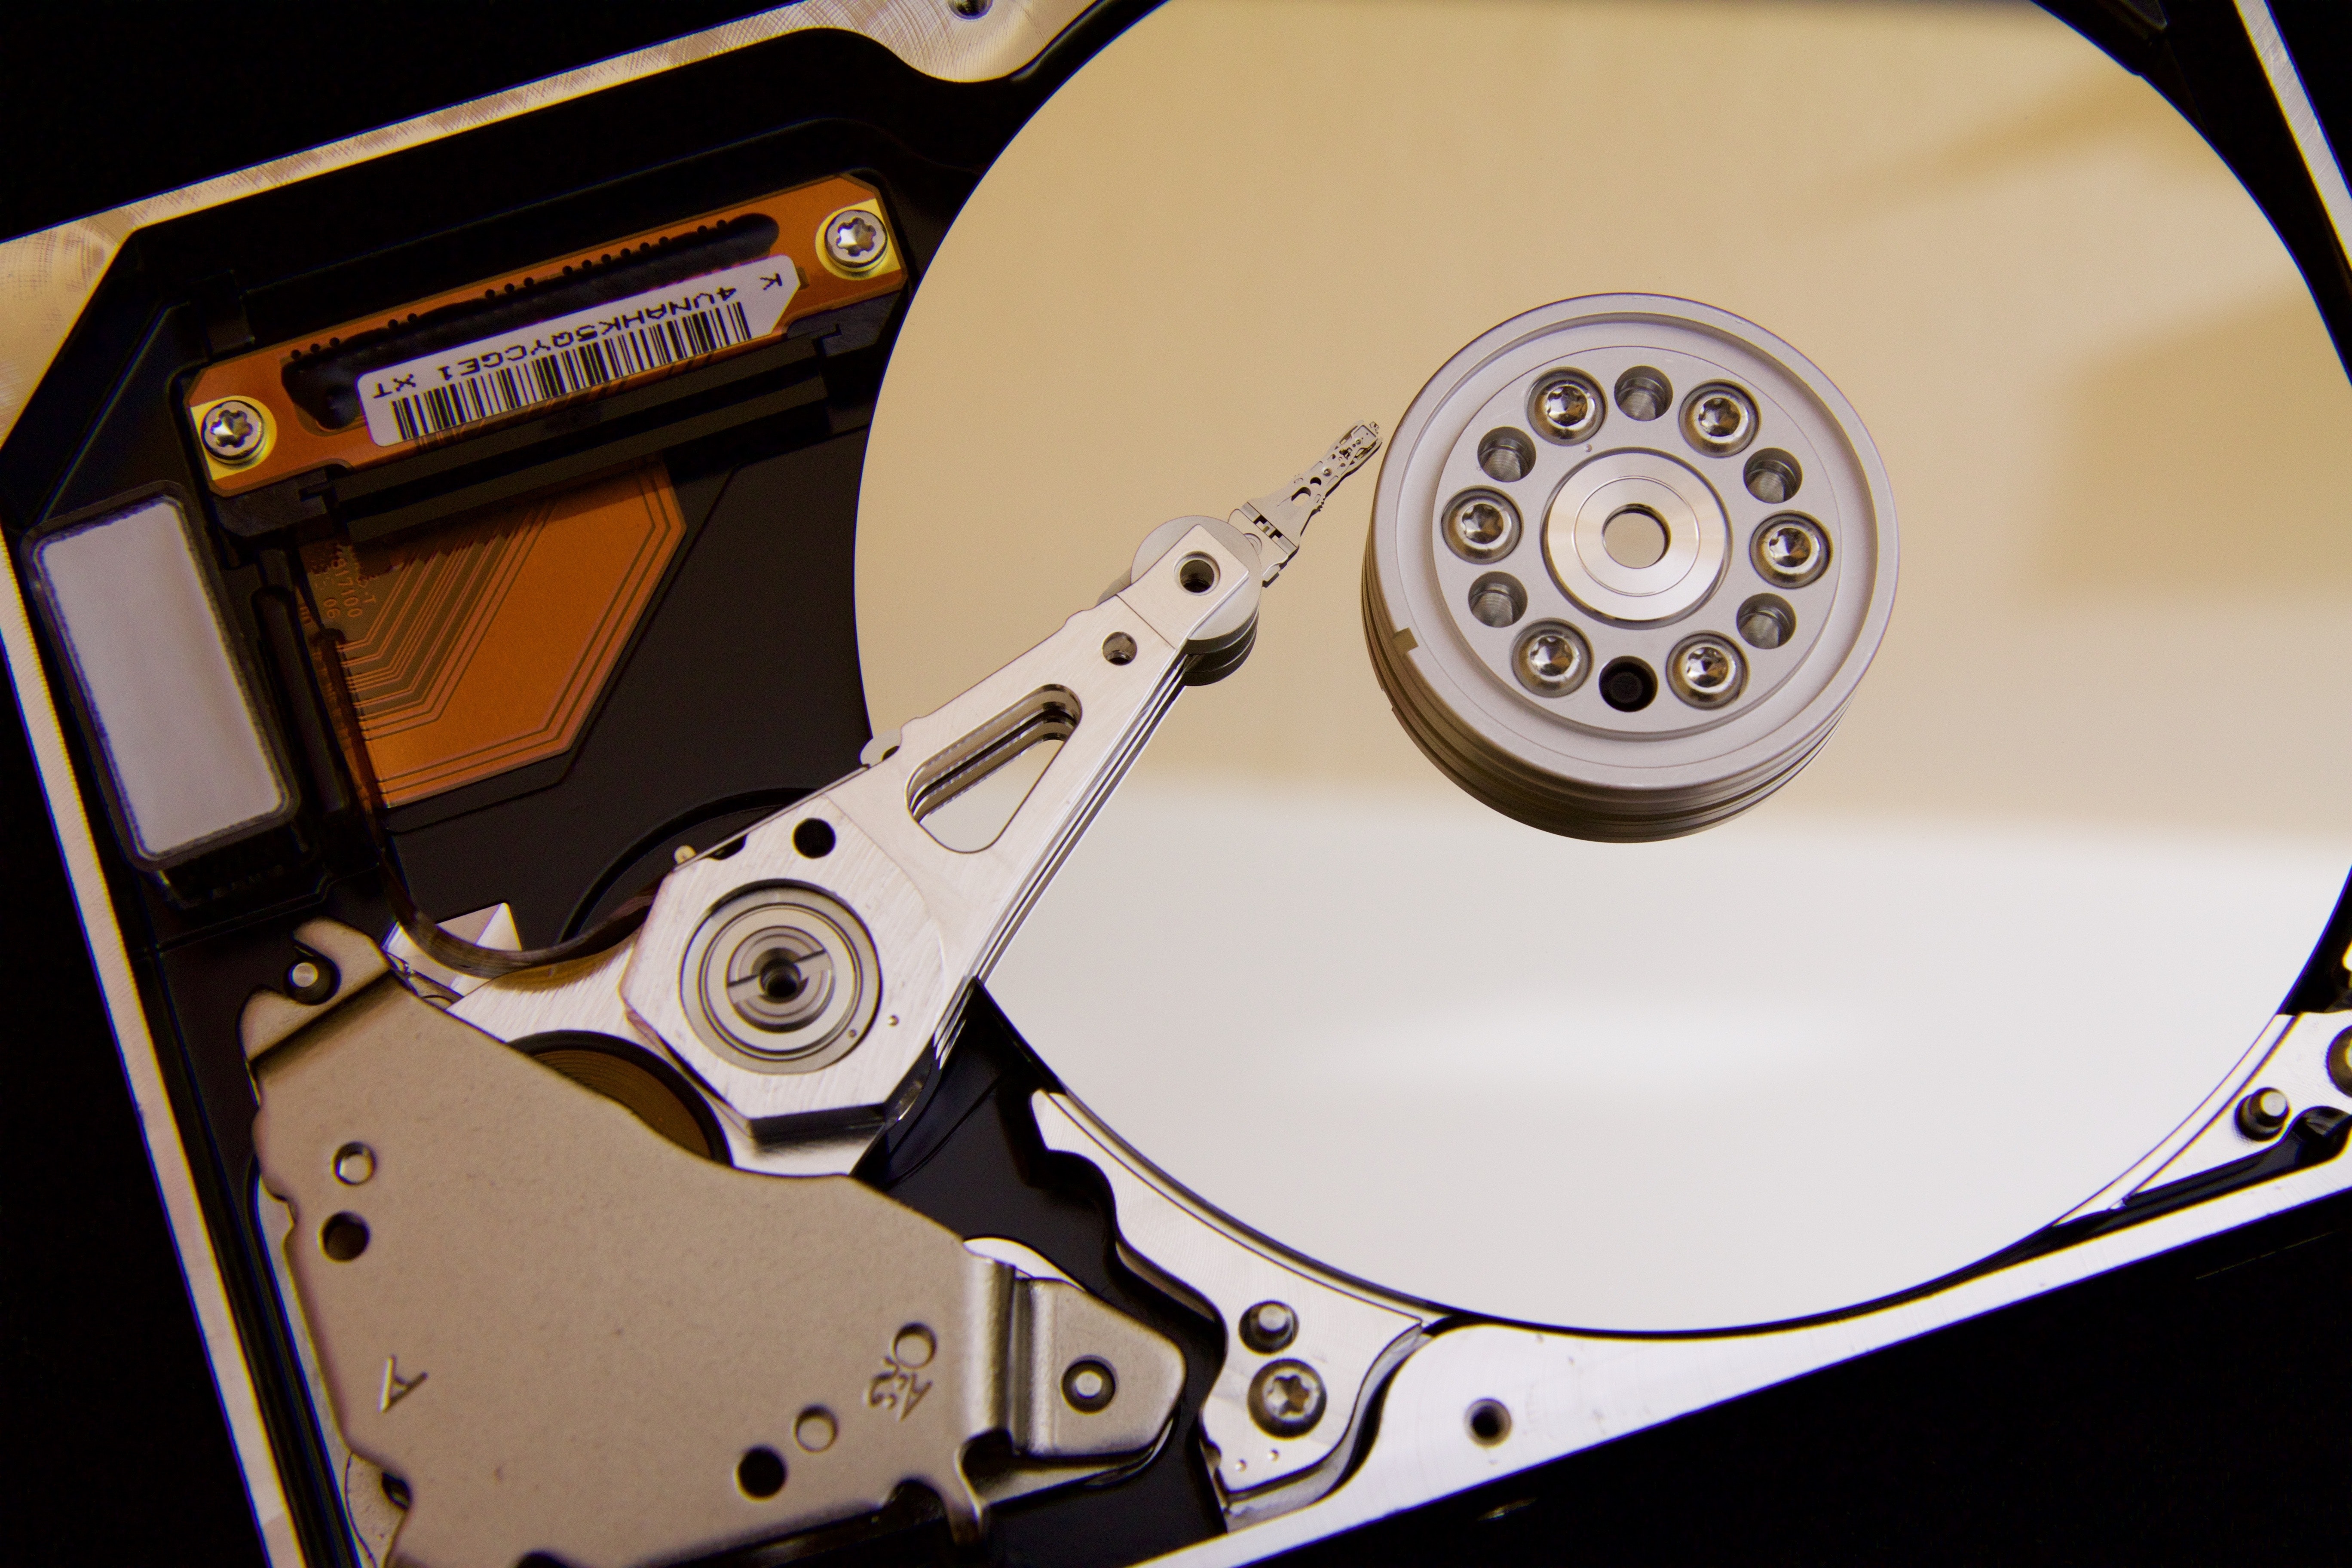 programs for cloning a hard drive